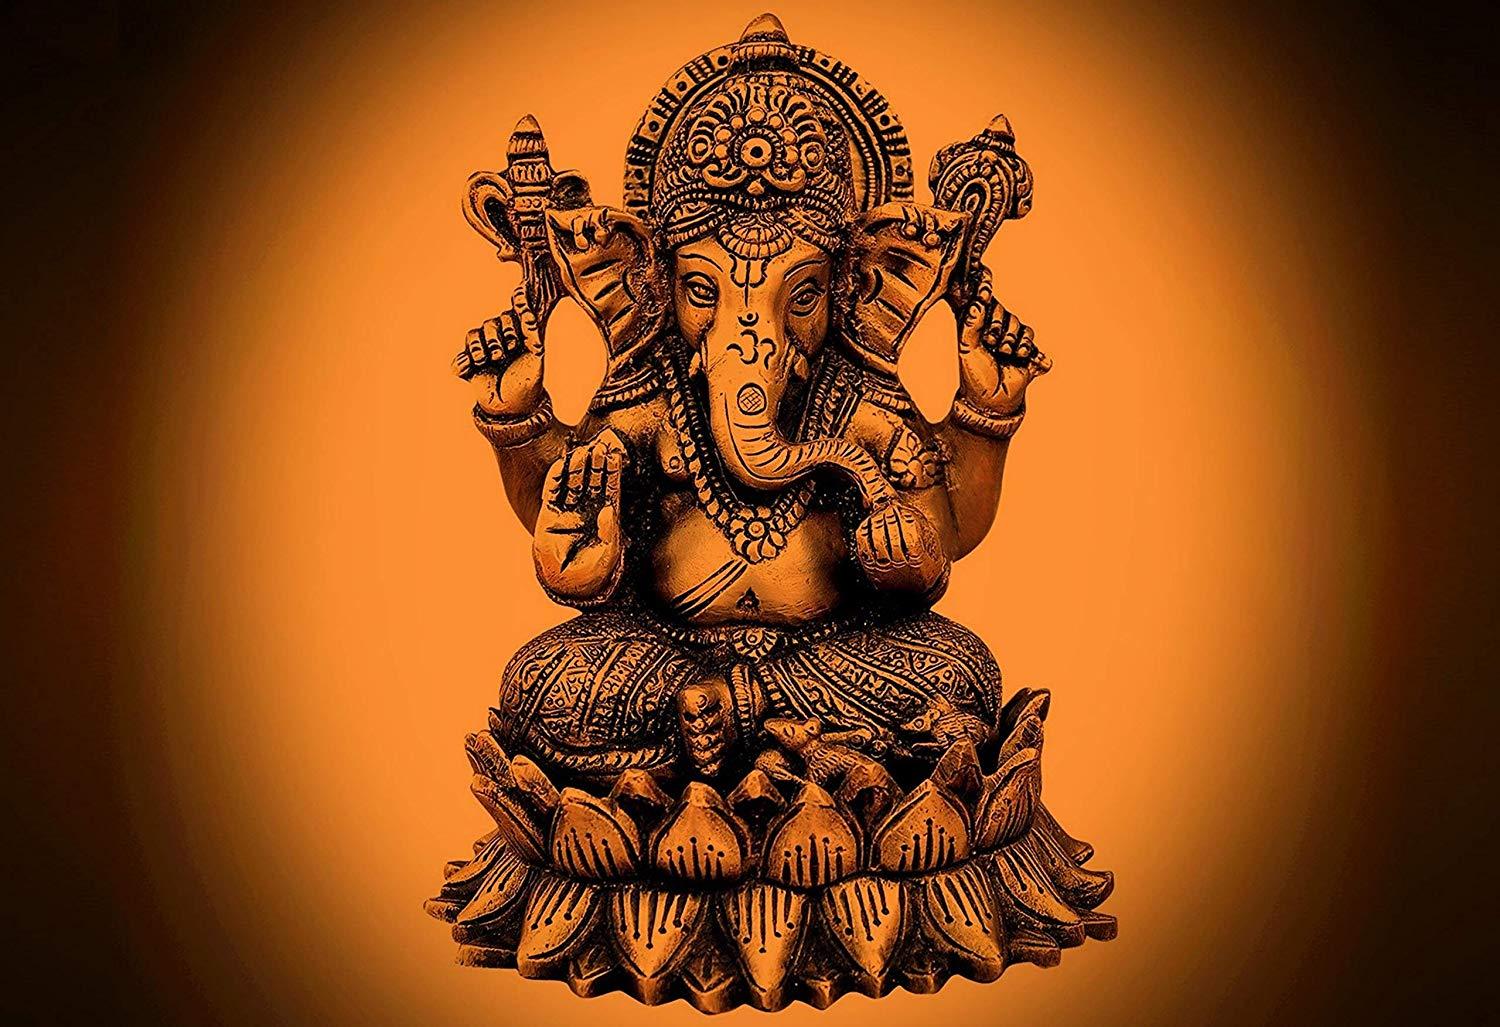 Ganpati Bappa Wallpapers Top Free Ganpati Bappa Backgrounds Wallpaperaccess Ganpati image is found all over in india and here we provide you all types of ganesh pictures and ganpati photo. ganpati bappa wallpapers top free